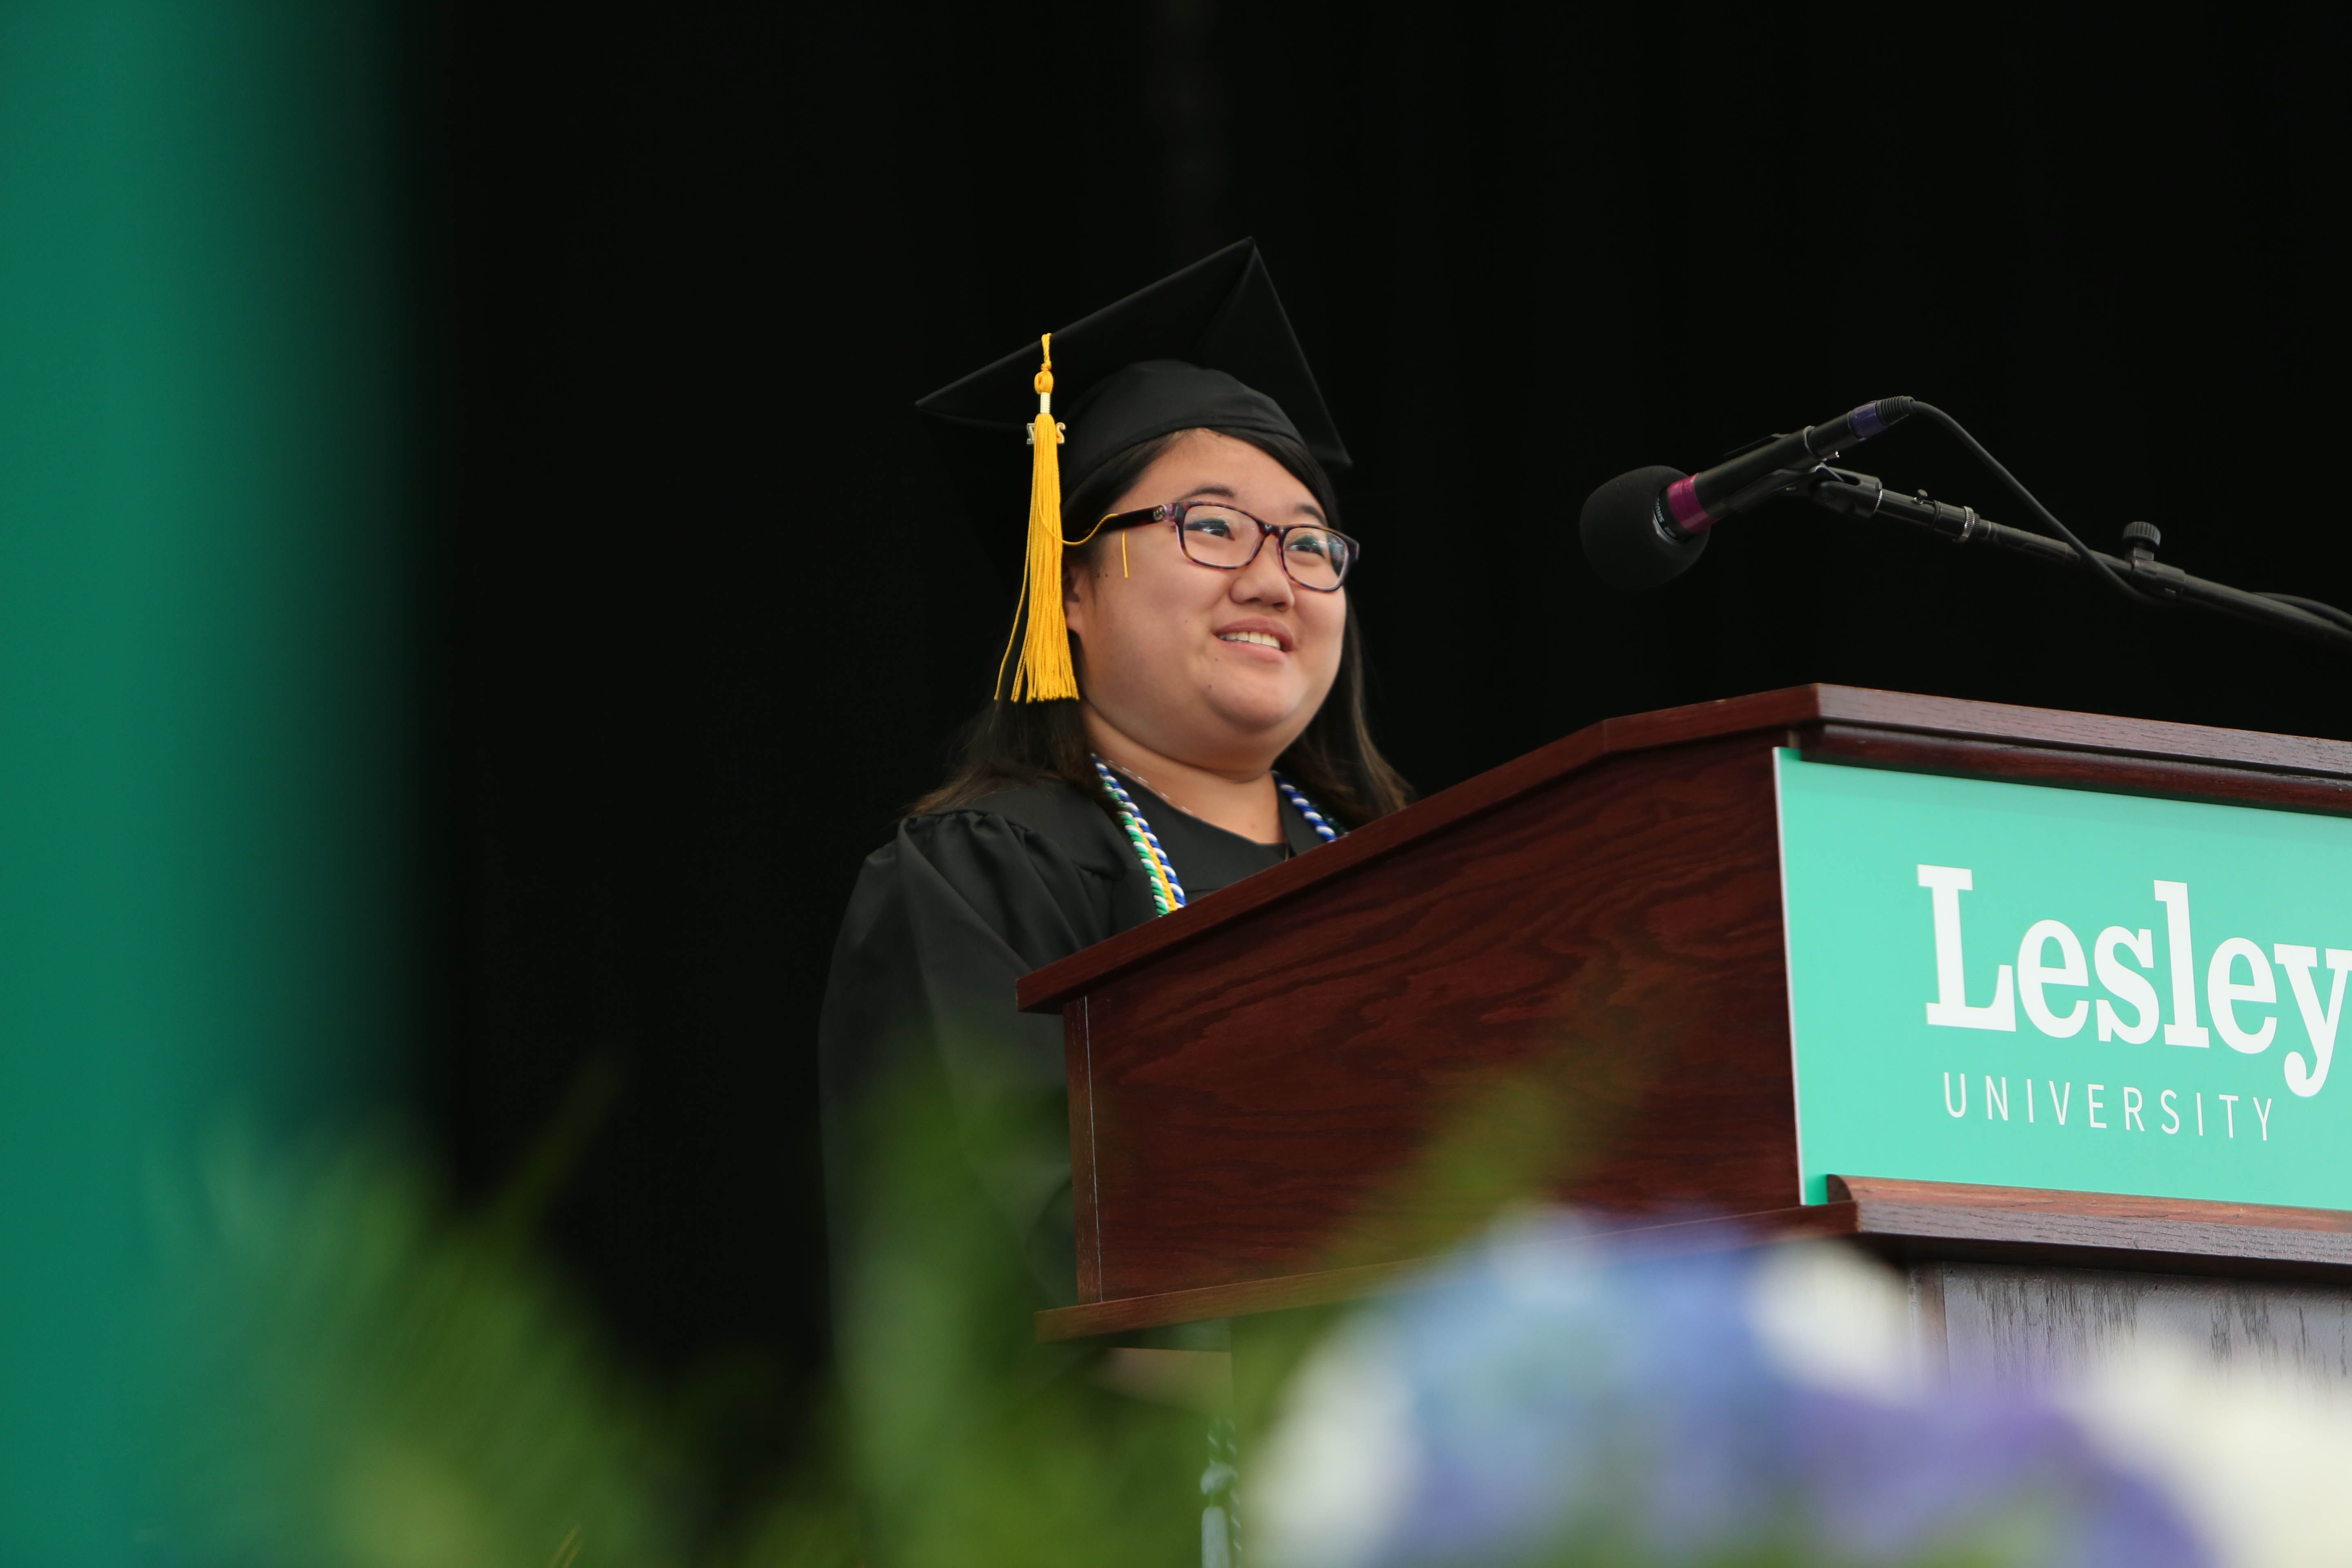 Student speaker Yoo-Ra Herlihy said her classmates “speak their minds” when they see problems.